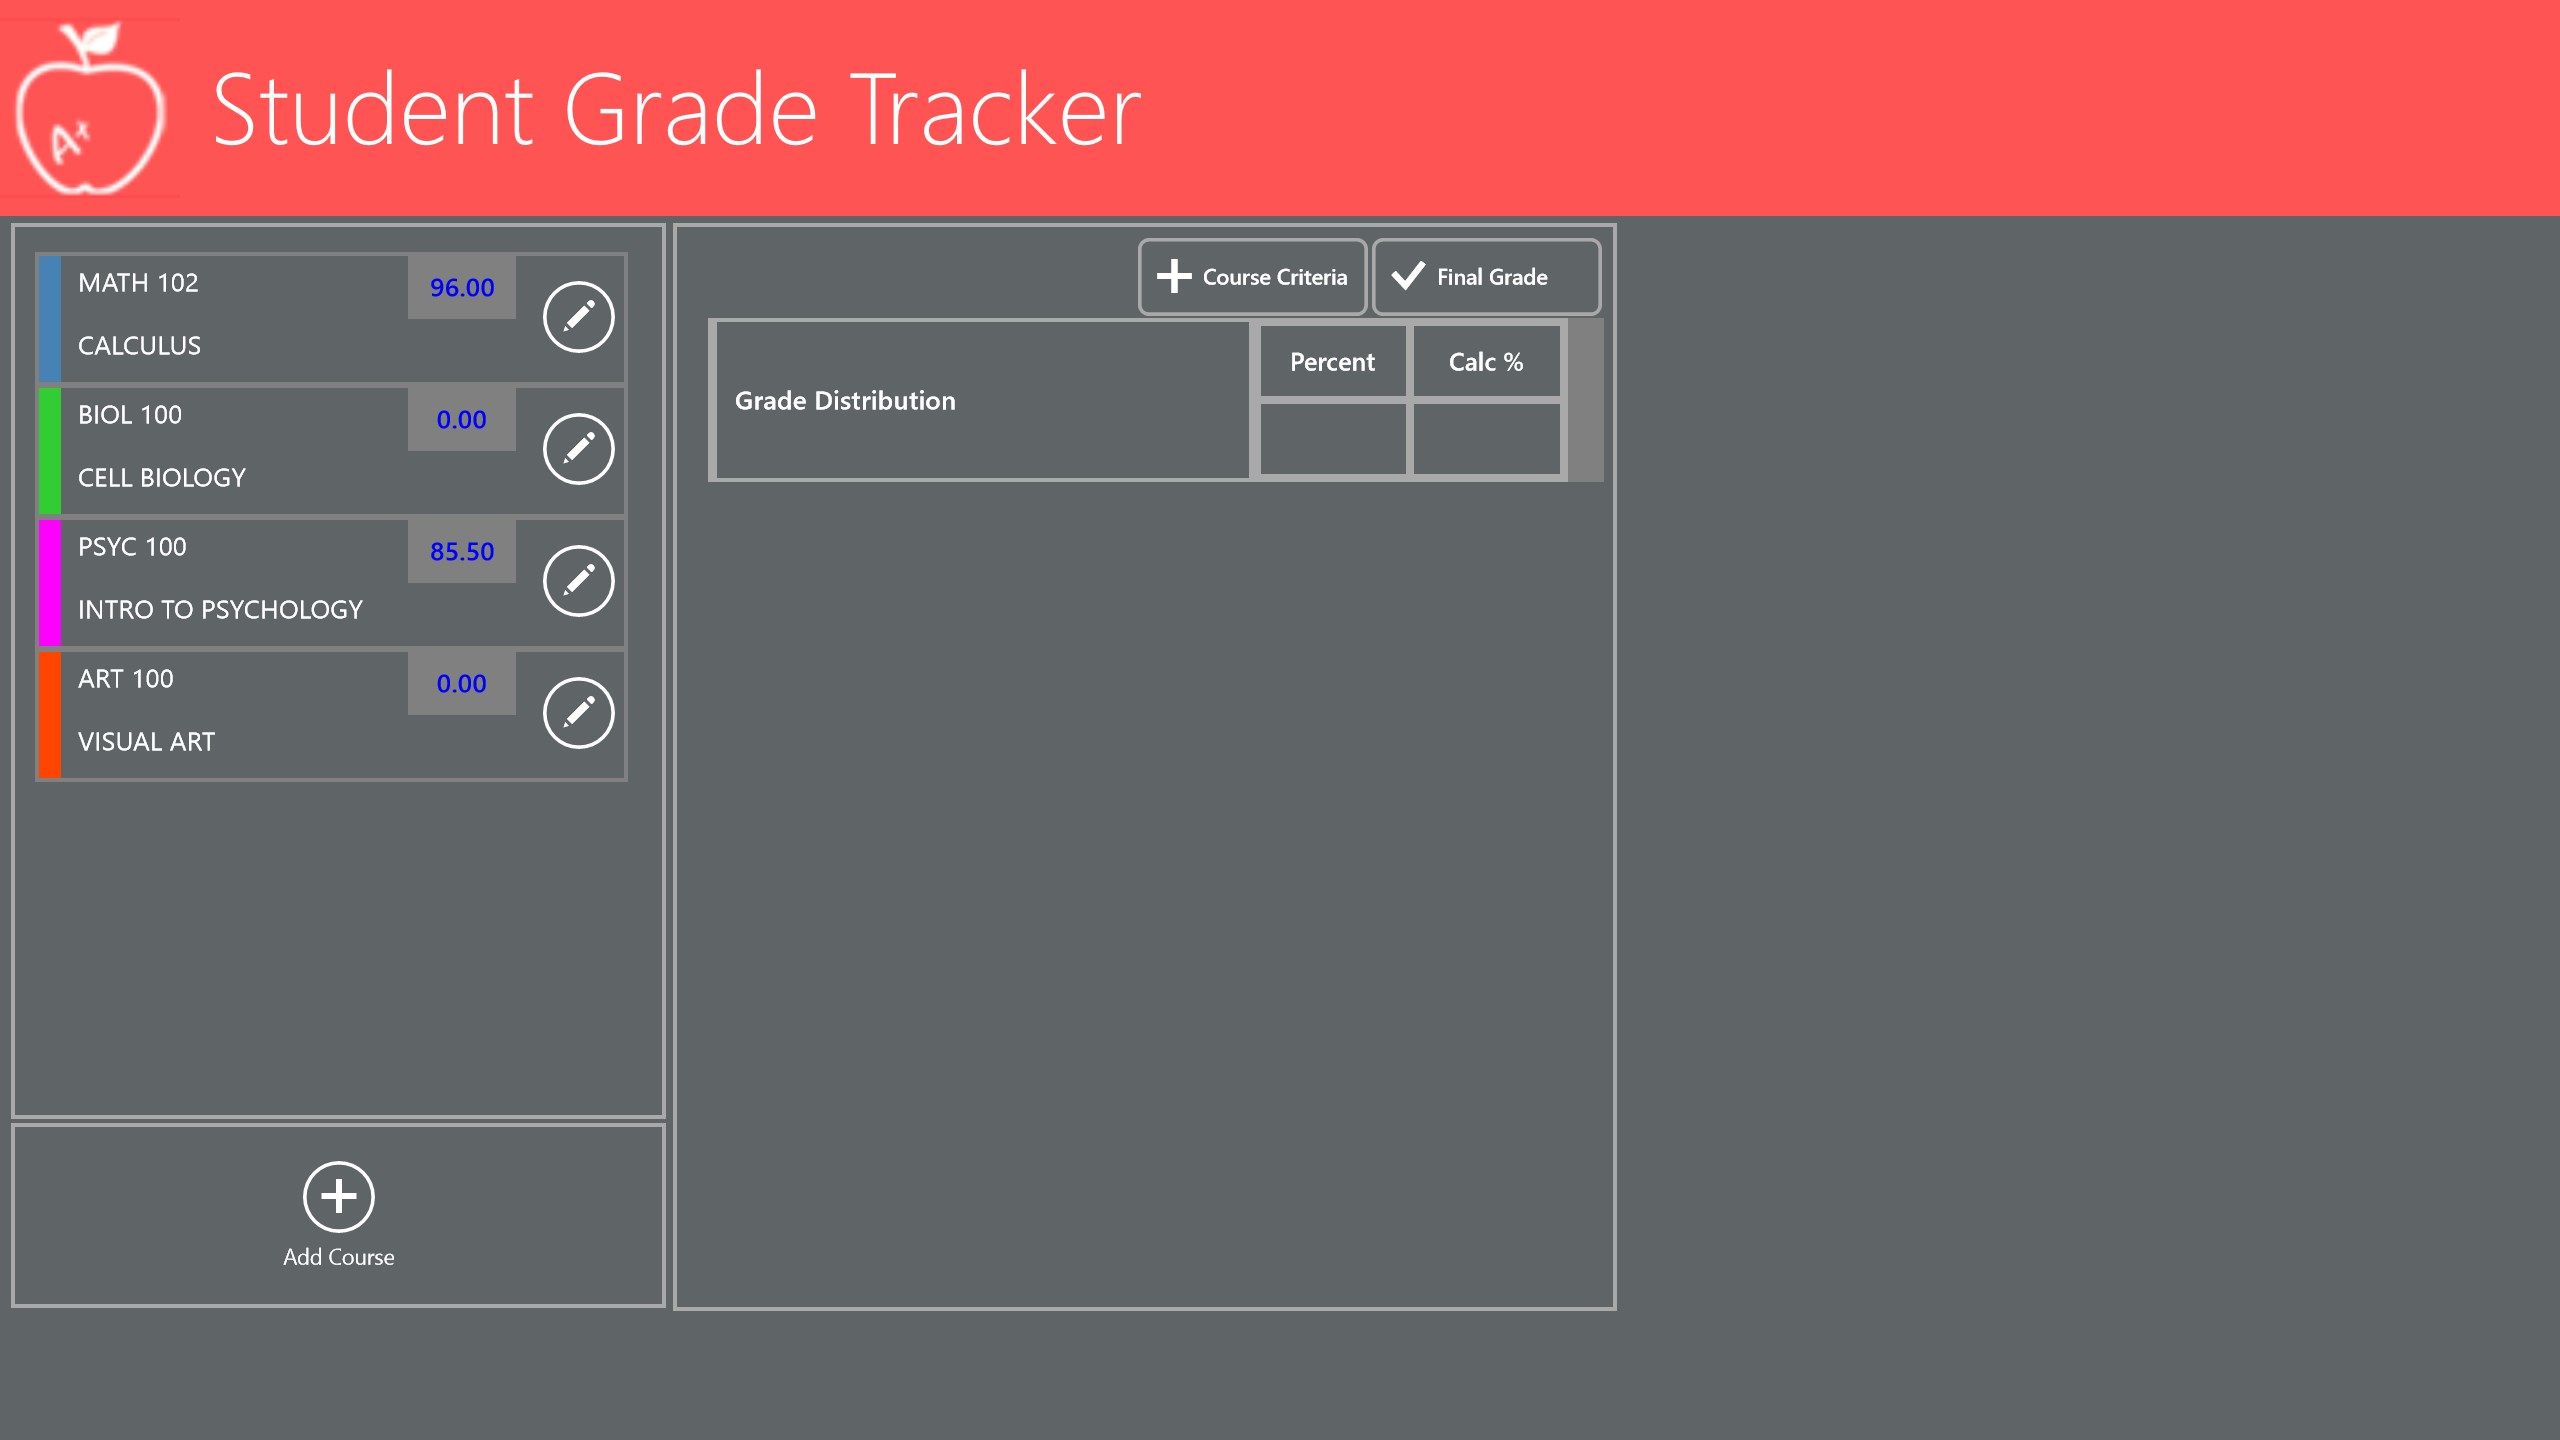 Student Grade Tracker list of courses to track grades